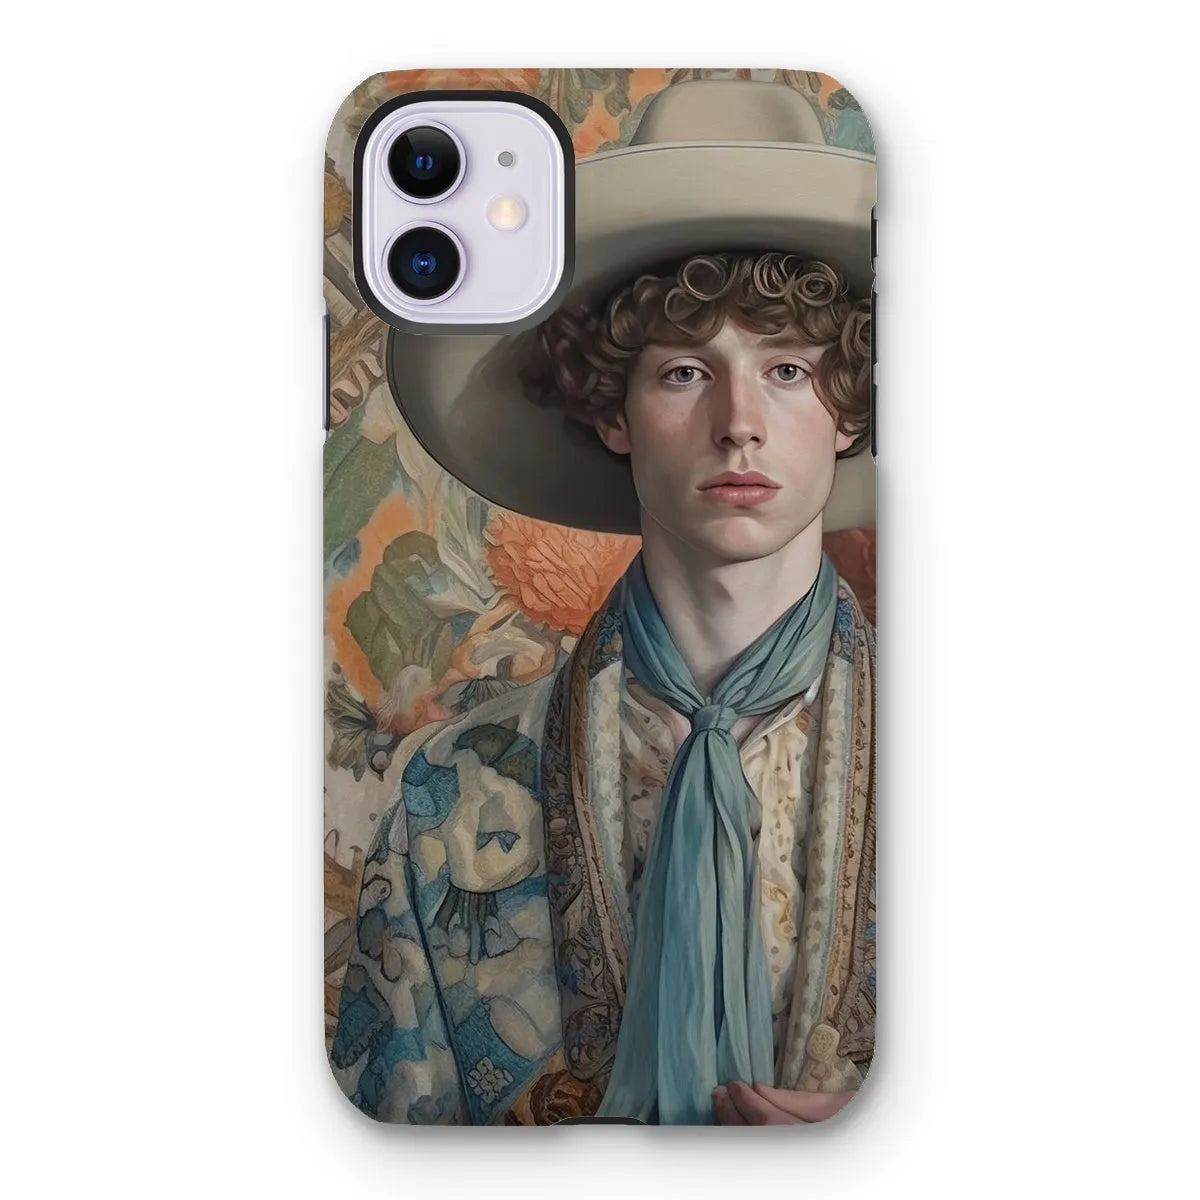 Theodore The Gay Cowboy - Dandy Gay Men Art Phone Case - Iphone 11 / Matte - Mobile Phone Cases - Aesthetic Art